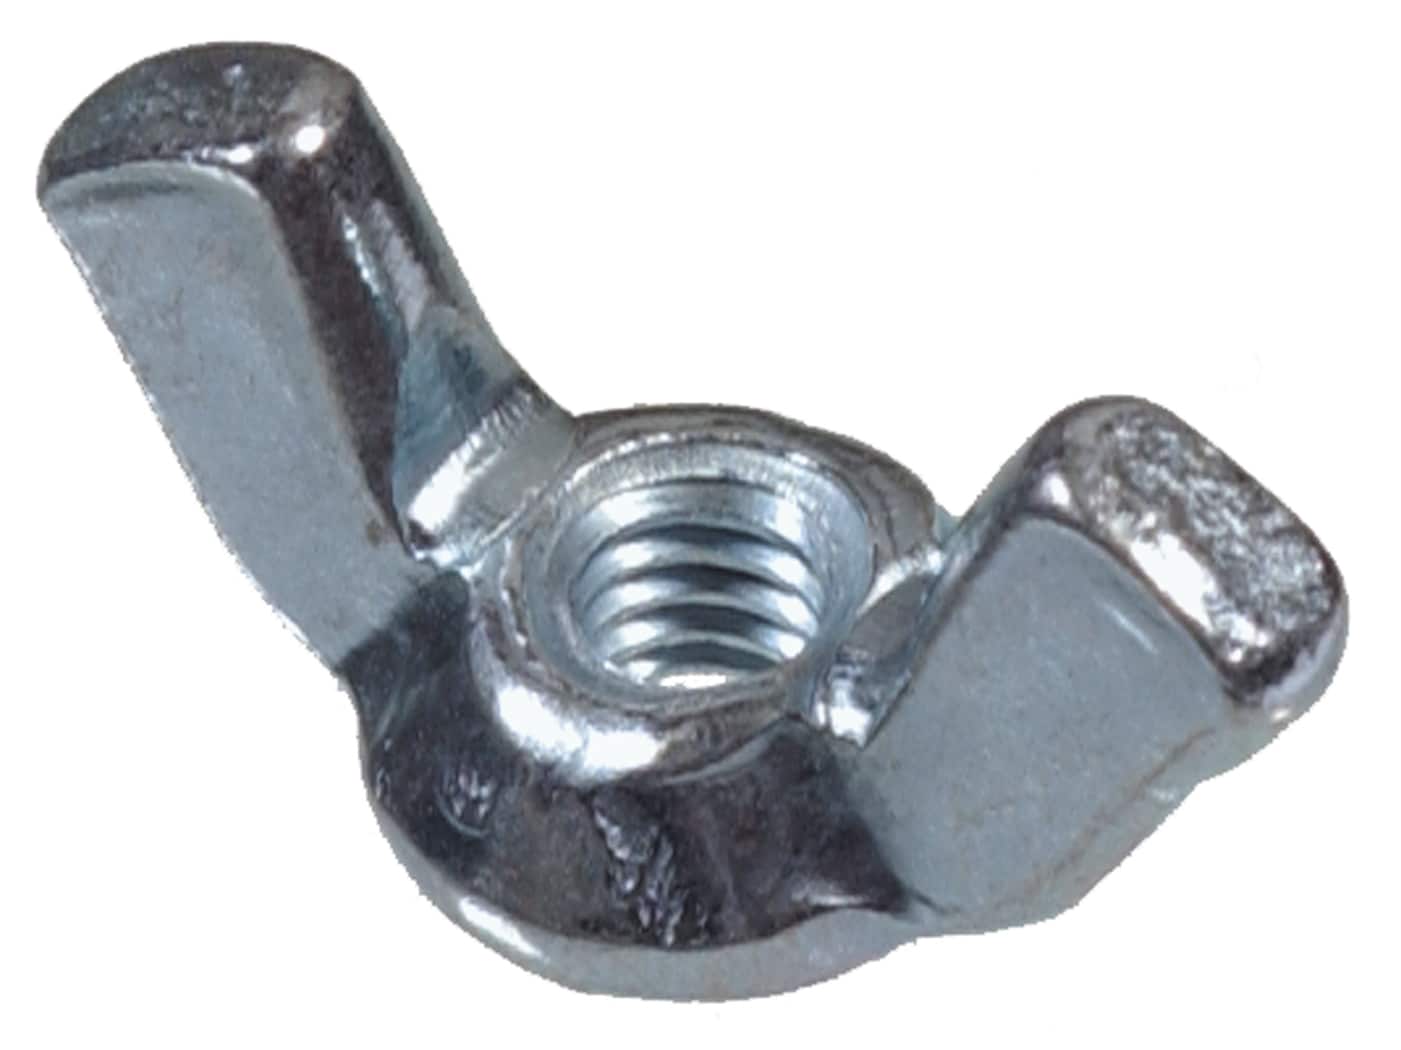 5/16-18 Zinc Plated Steel Type A Forged Wing Nuts 10-24 #8-32 10-32 1/4-20 